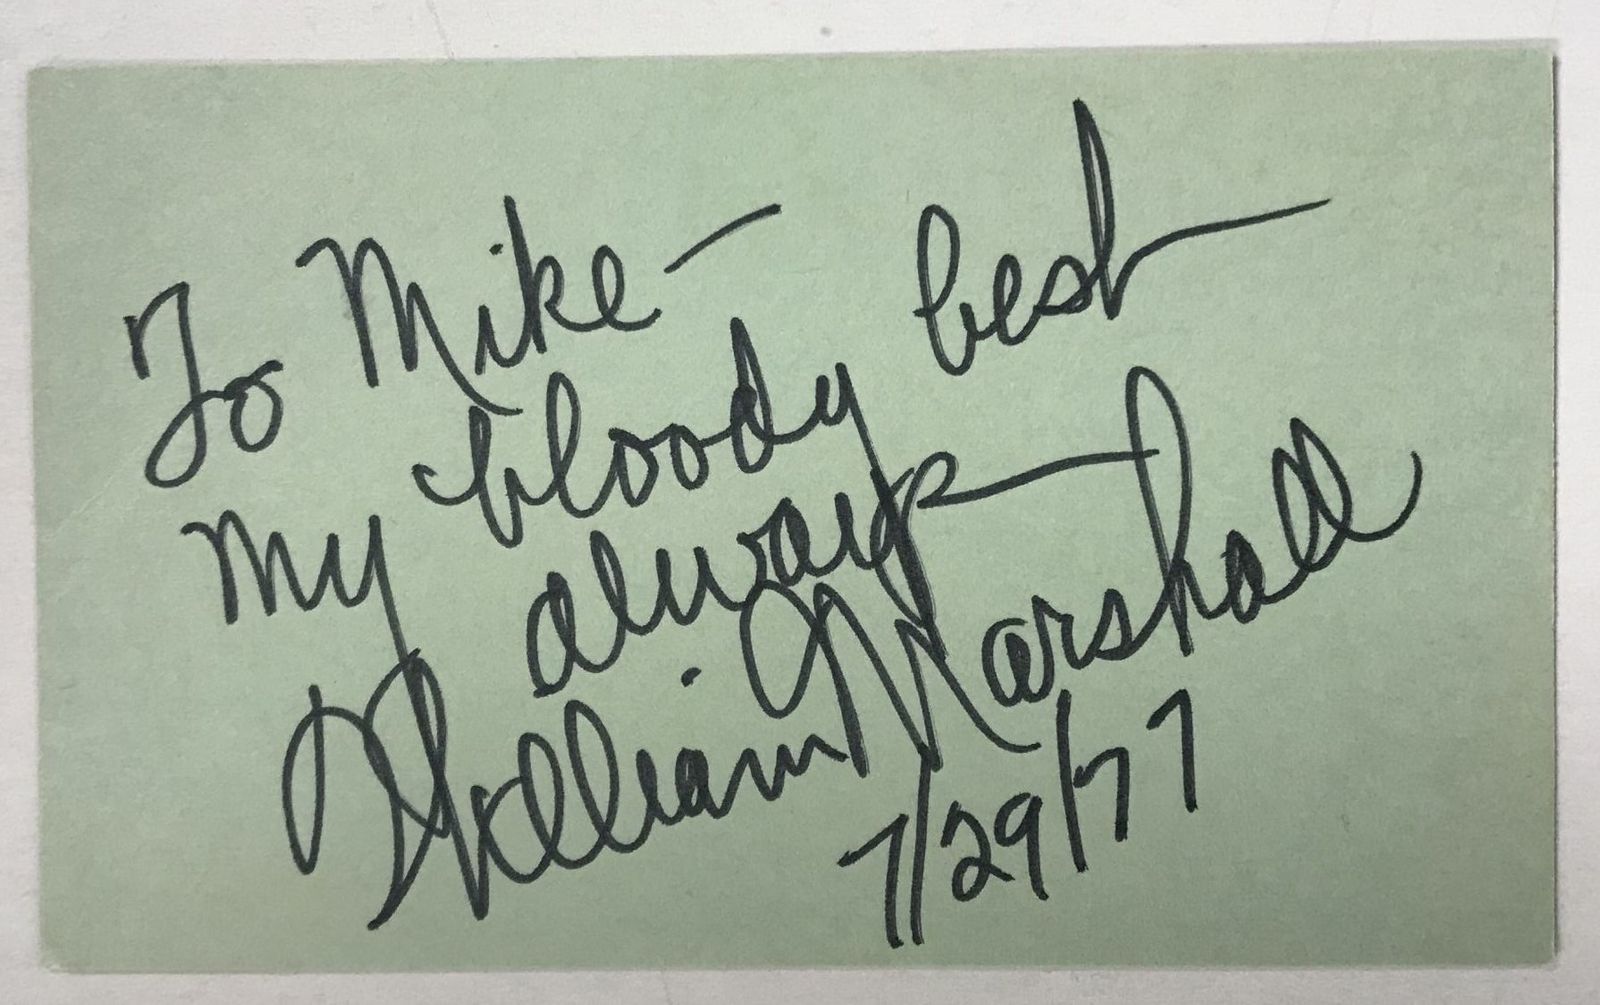 Primary image for William Marshall (d. 2003) Signed Autographed Vintage 3x5 Index Card